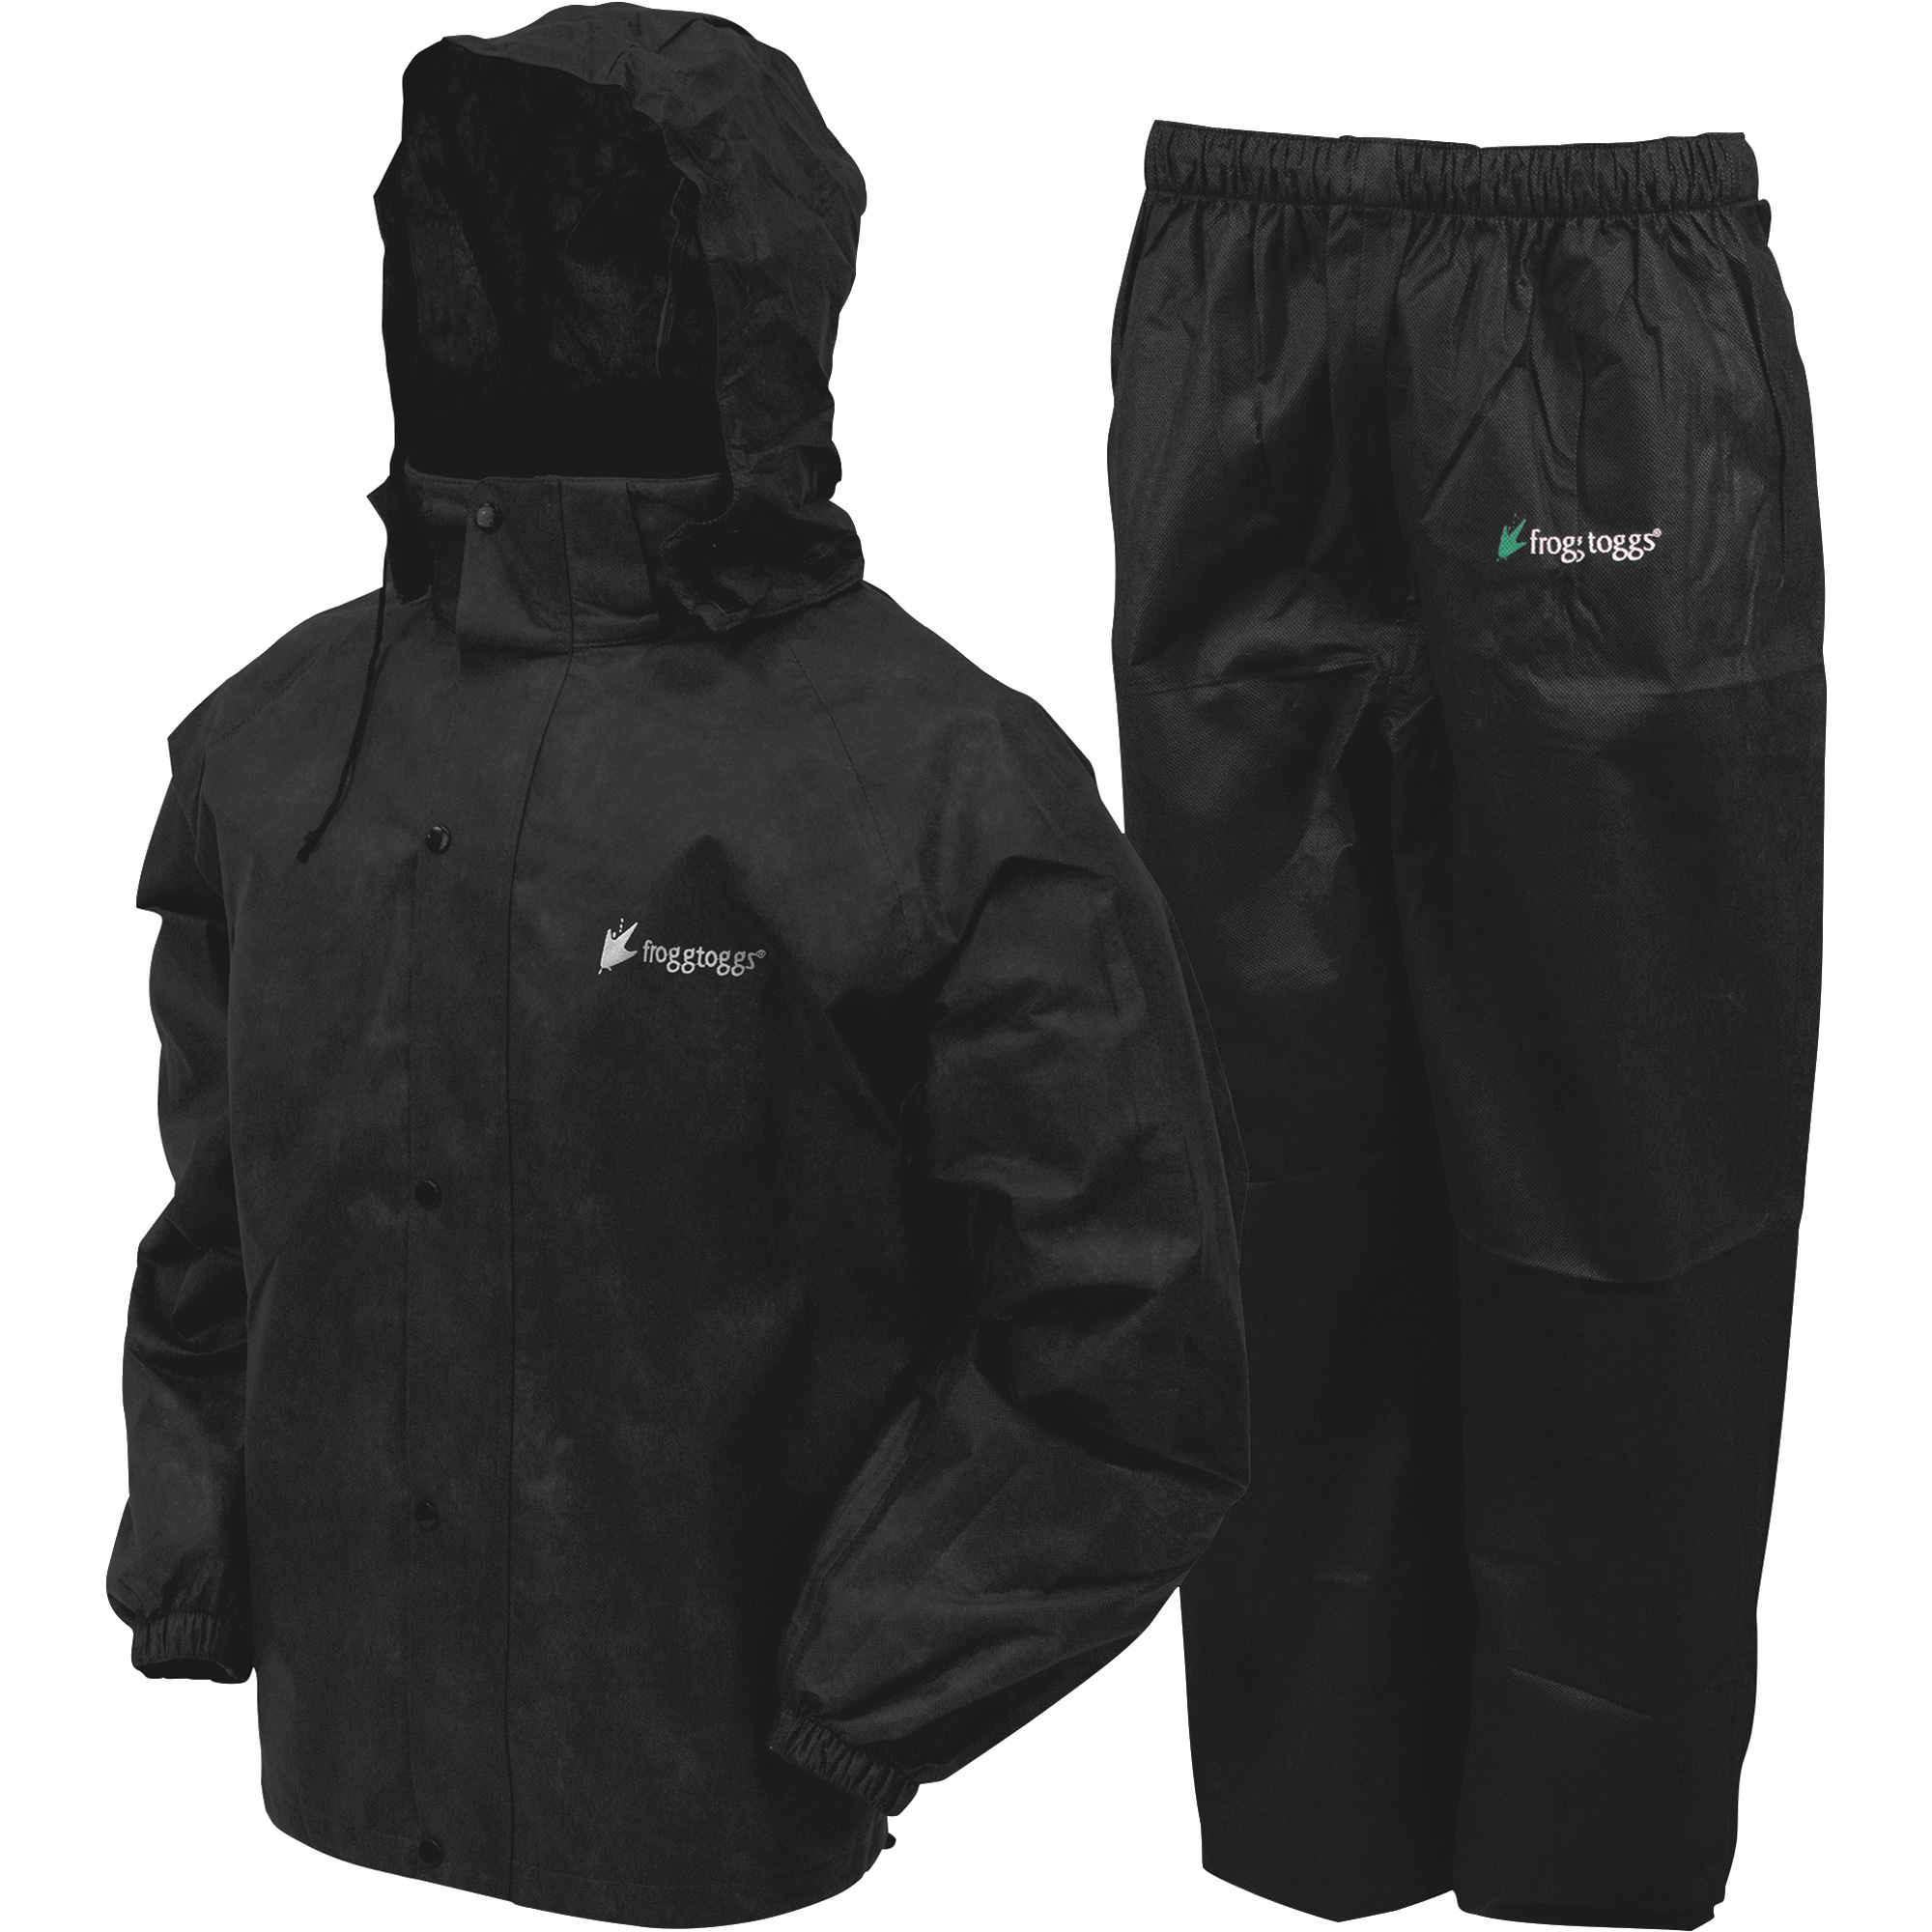 Frogg Toggs Men's Classic 50 All-Sport Rain and Wind Suit â Black, 2XL, Model AS1310-012X